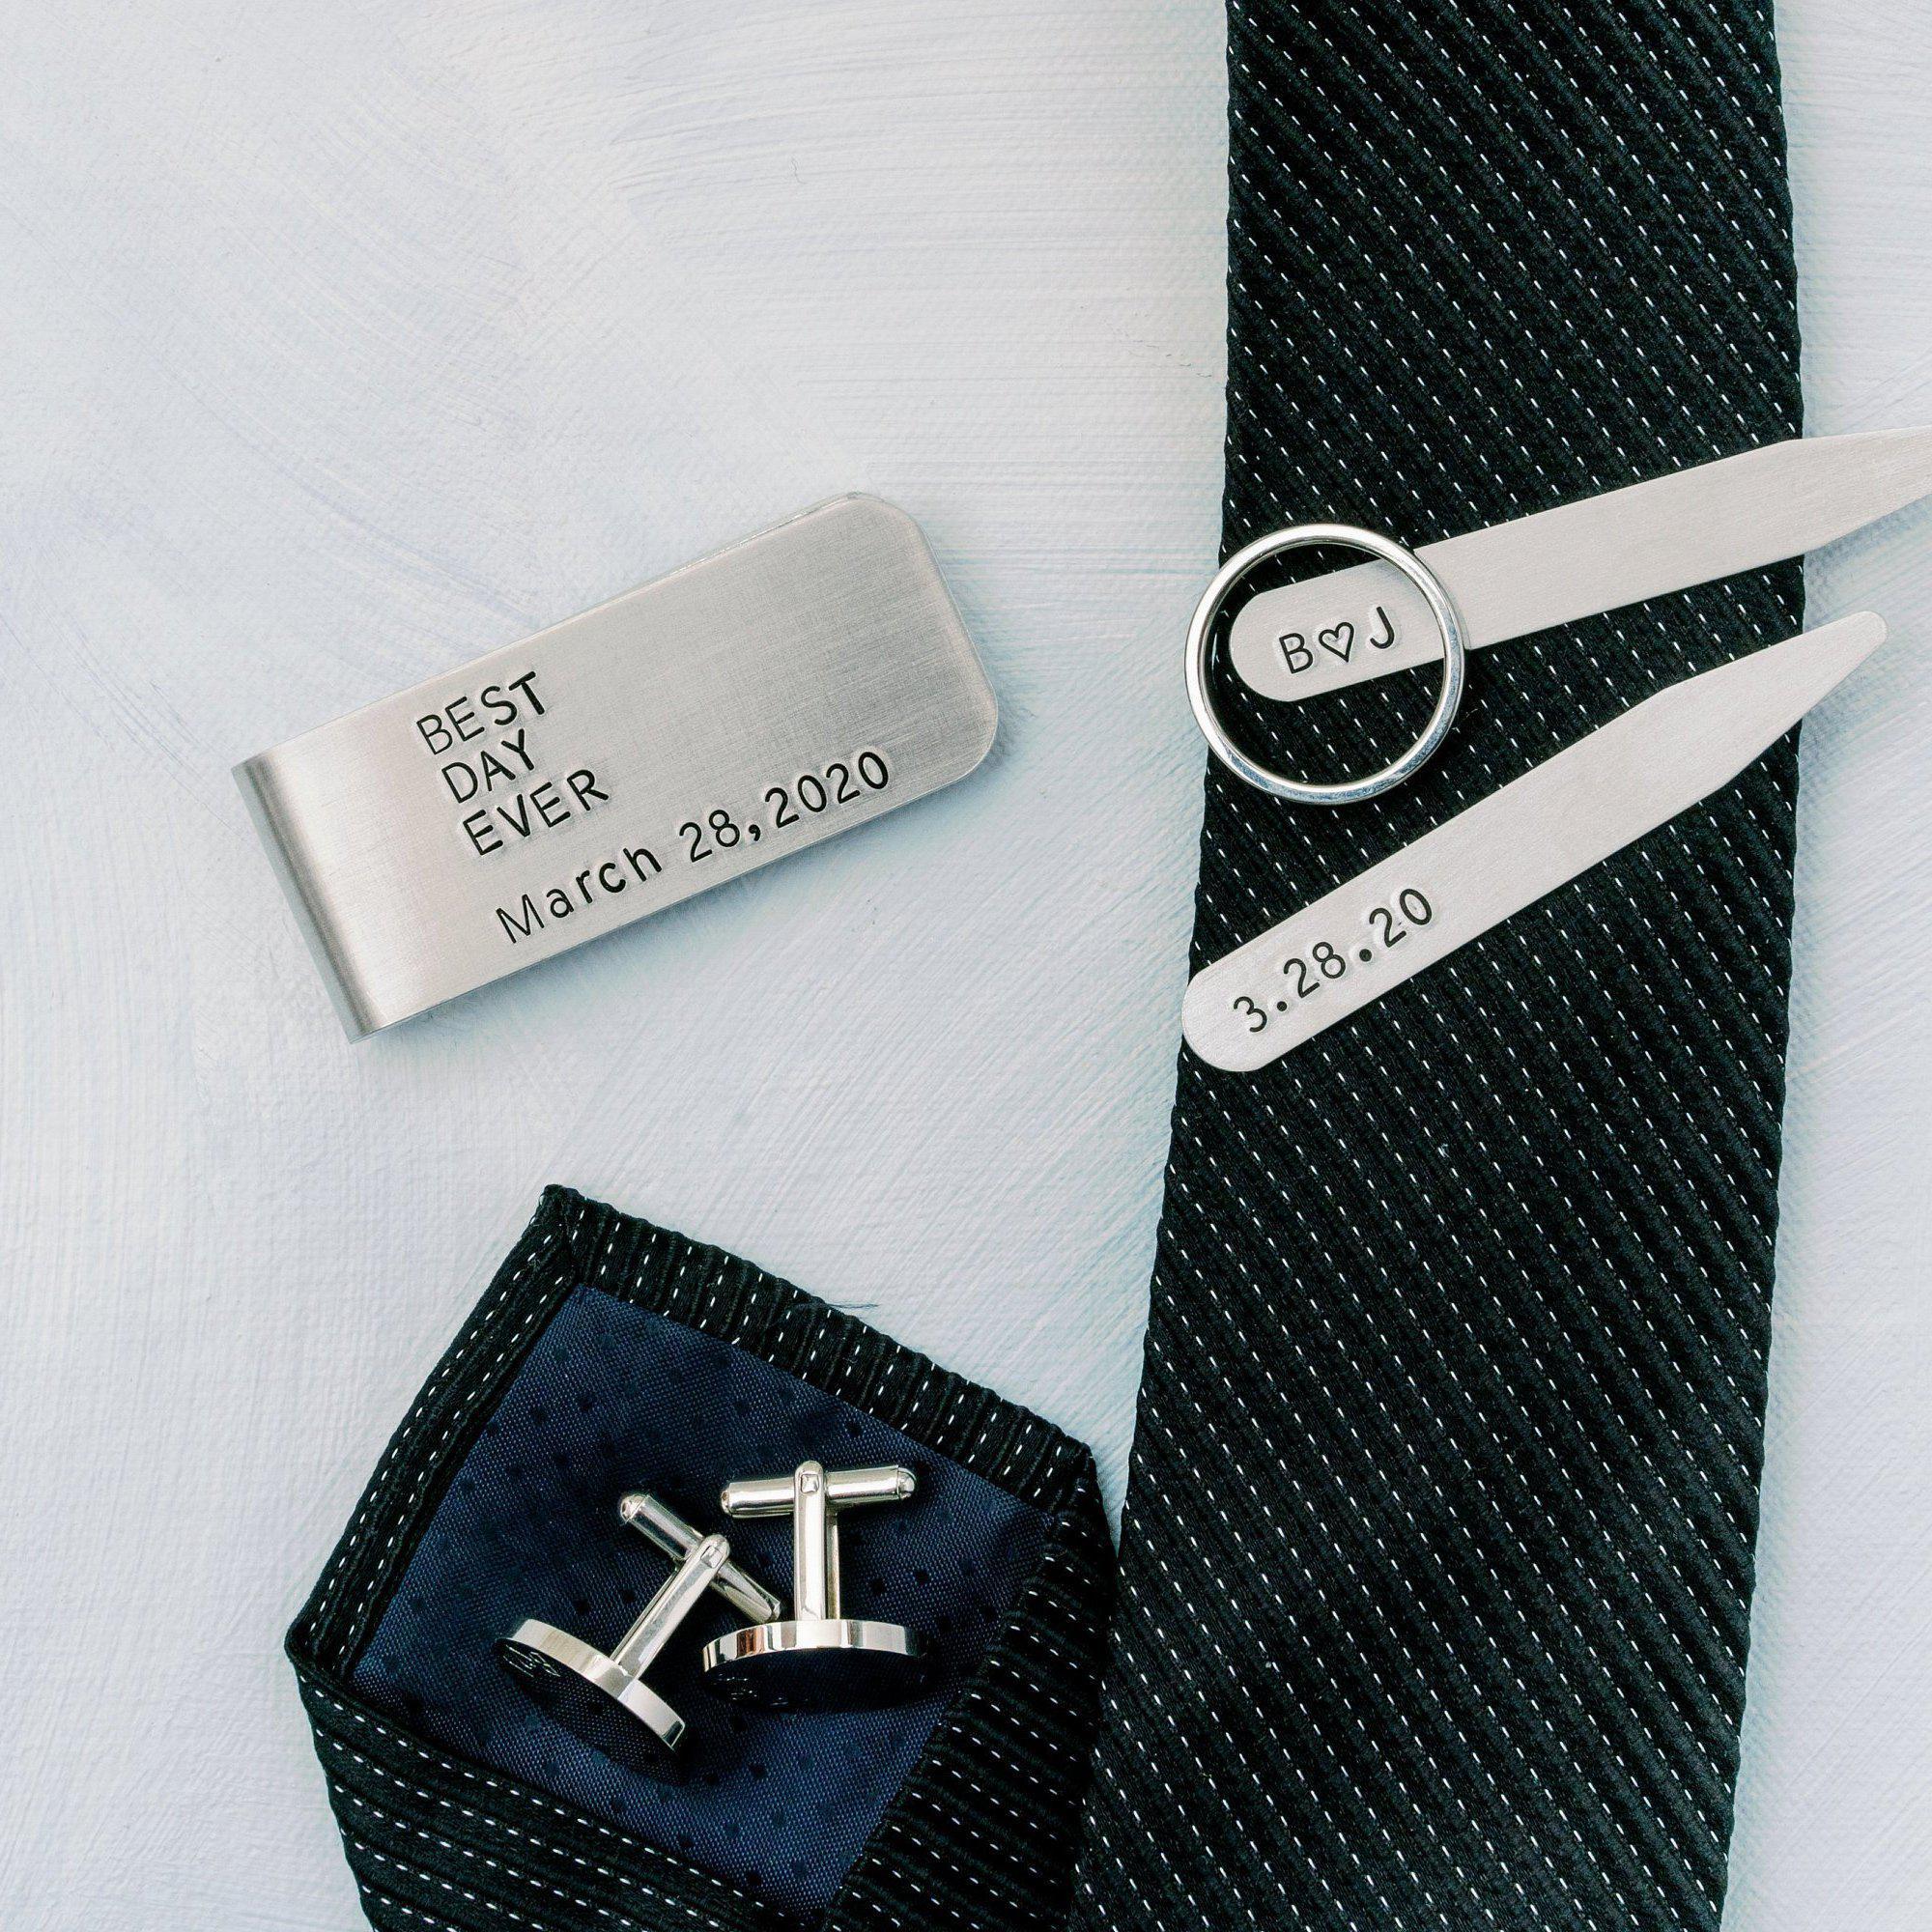 Personalized Collar Stays with Initials and Date for Men Salt and Sparkle